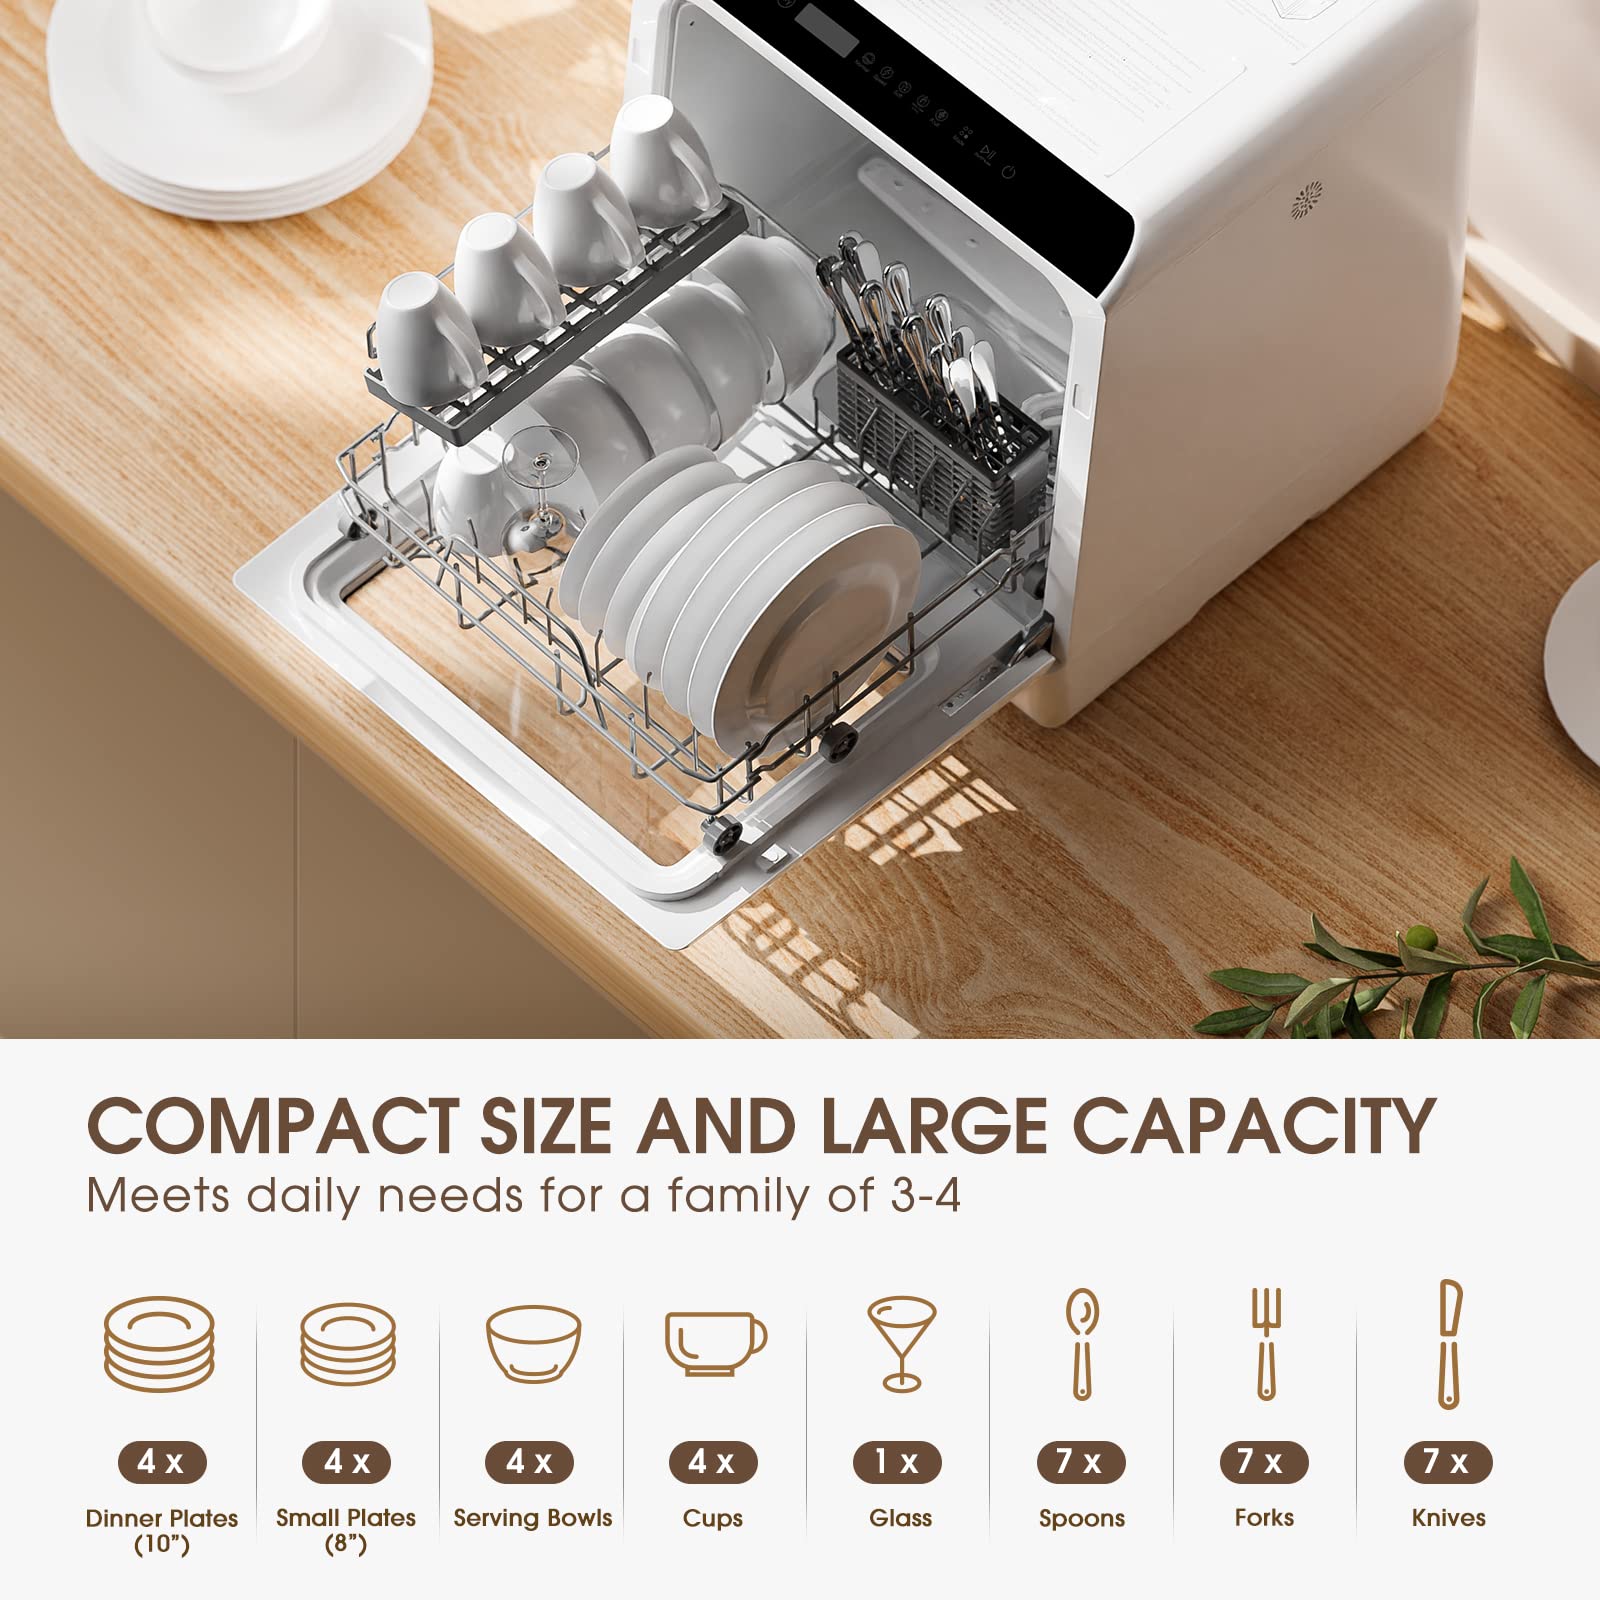 Portable Countertop Dishwashers, NOVETE Compact Dishwashers with 5 L Built-in Water Tank & Inlet Hose, 5 Washing Programs, Baby Care, Air-Dry Function and LED Light for Small Apartments, Dorms and RVs